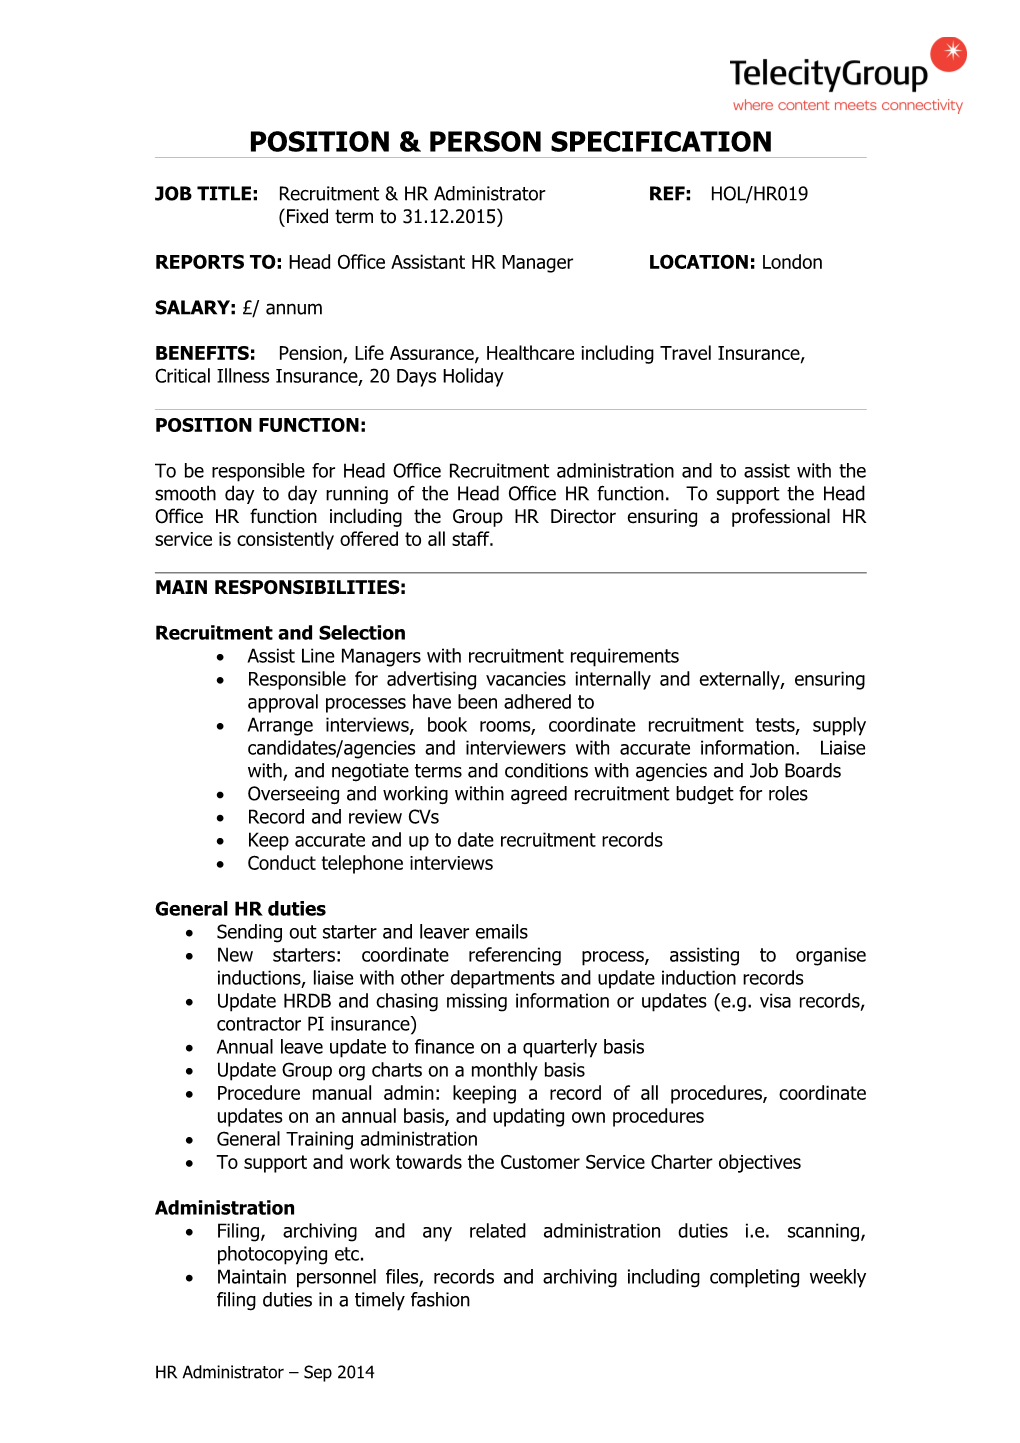 Position & Person Specification